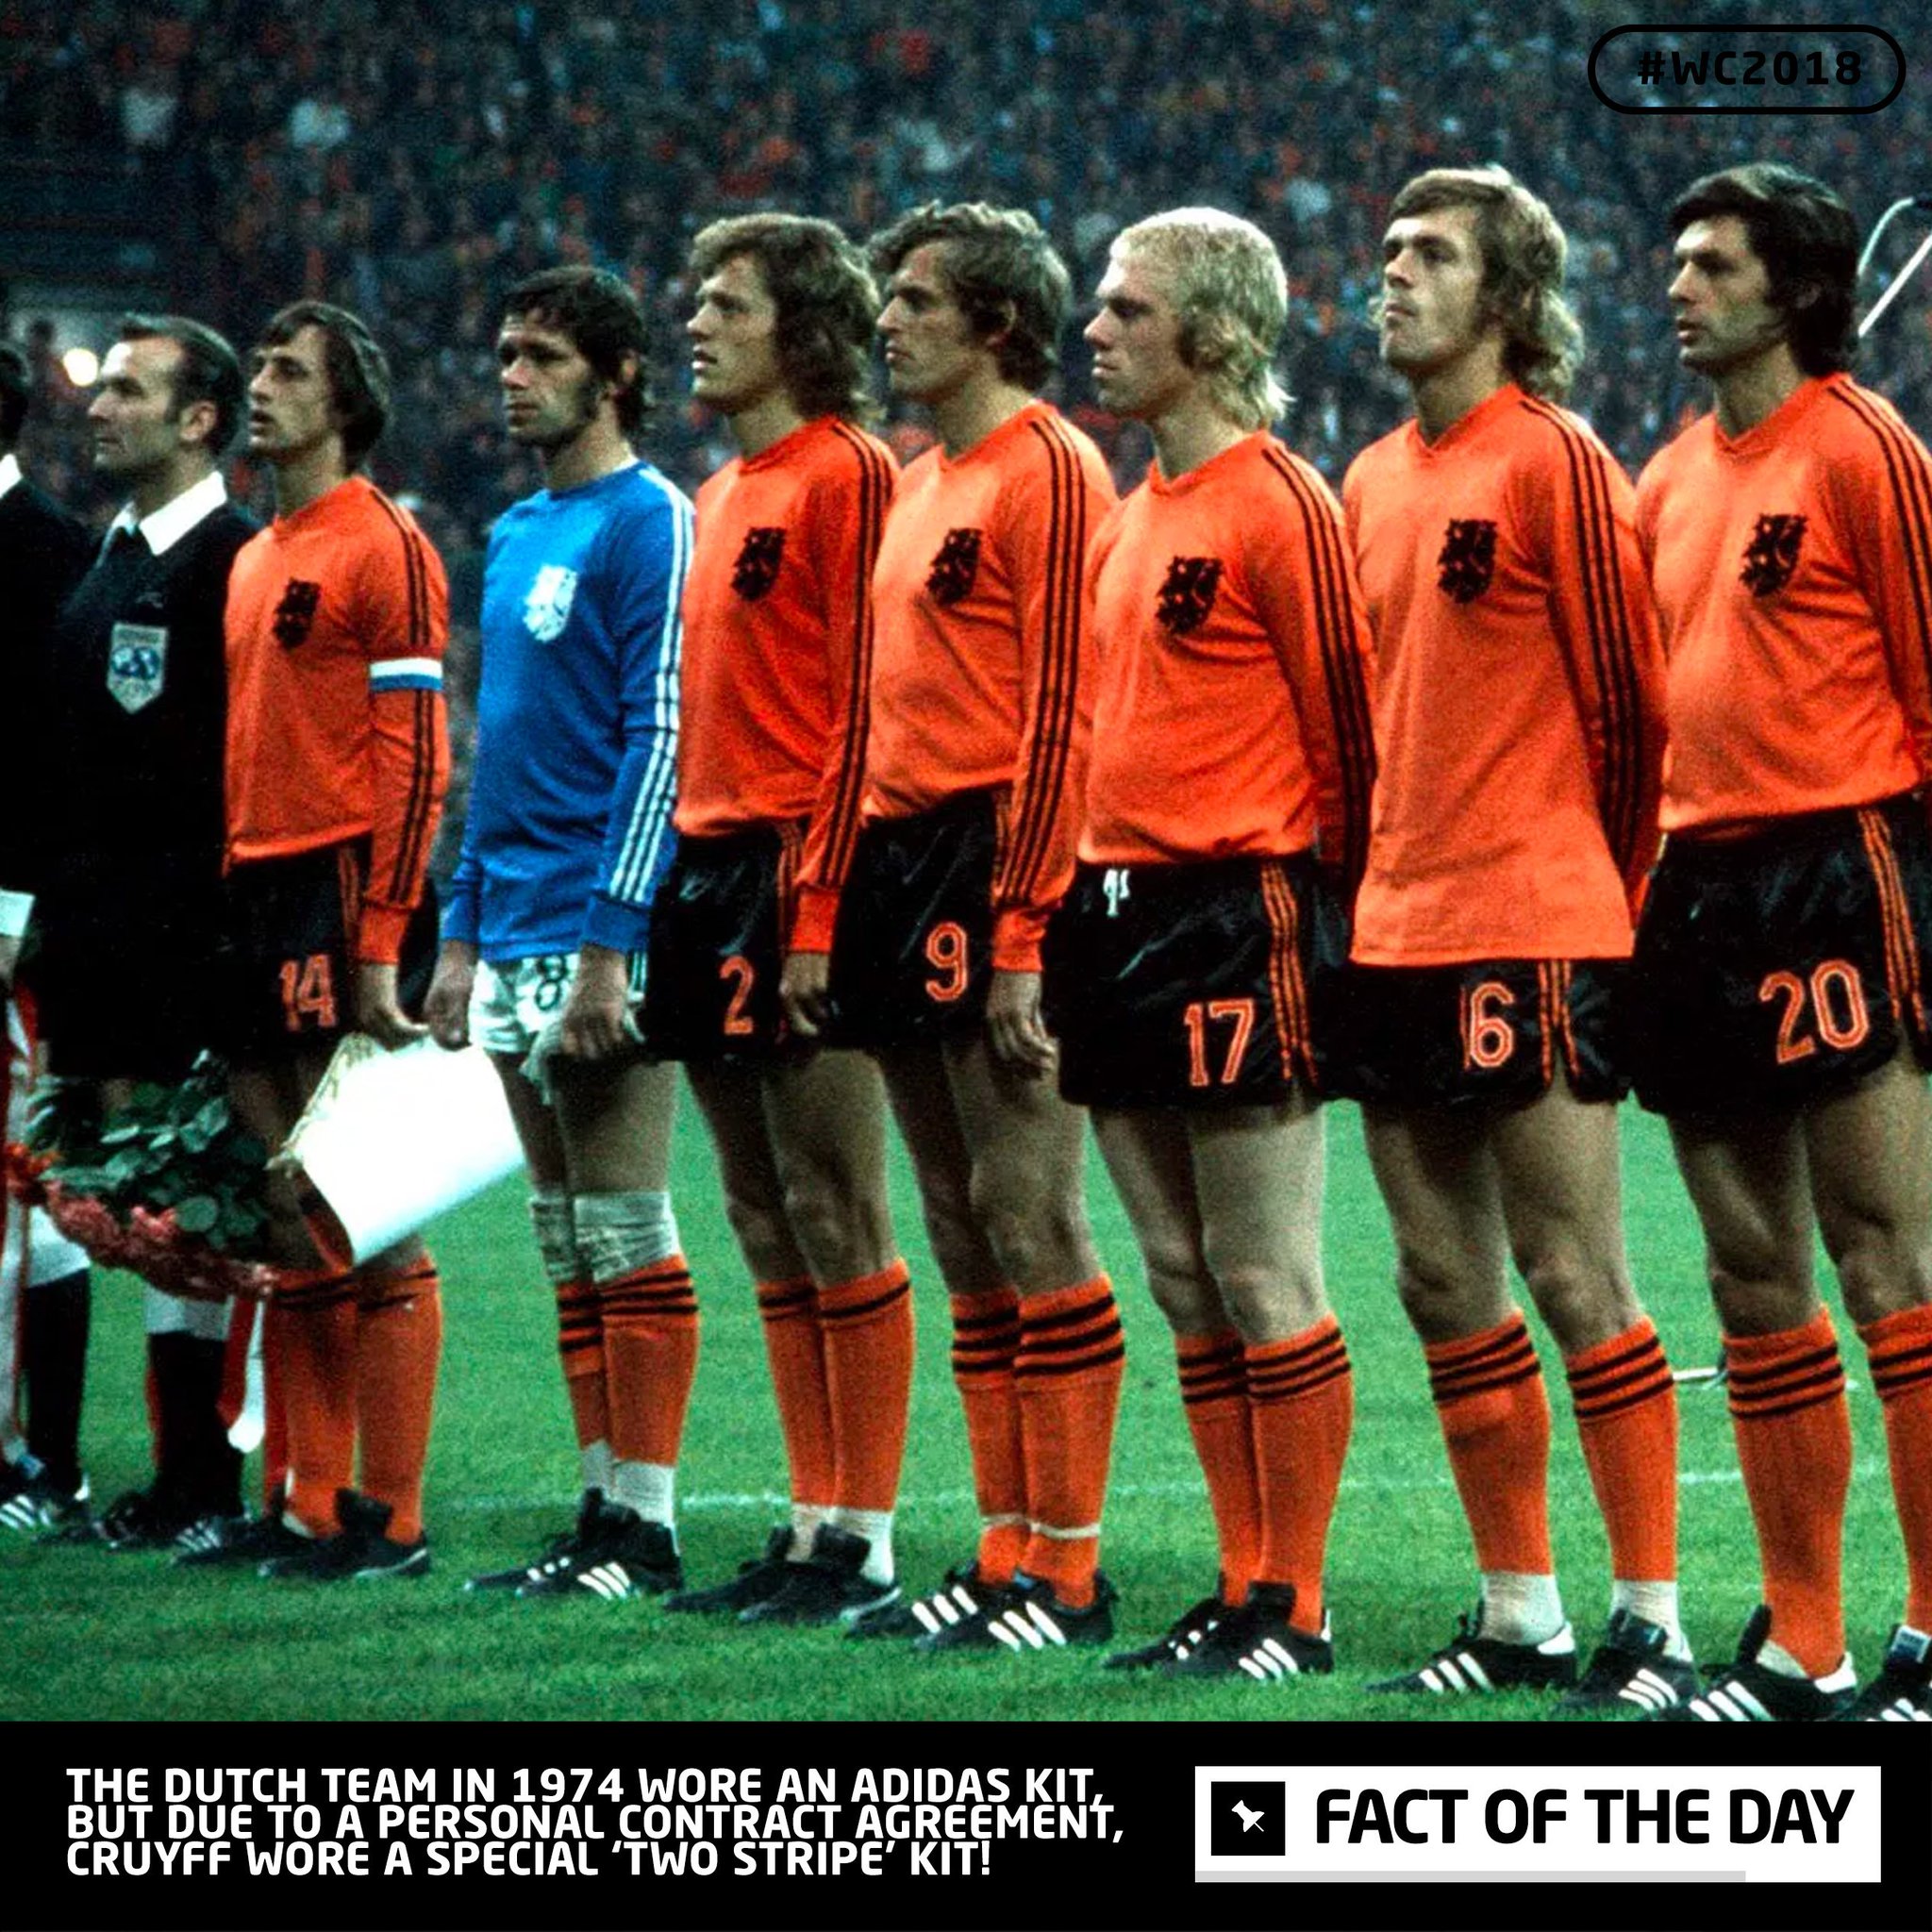 blad motto kleding Ste Howson on Twitter: "Is sponsor intrusion a symptom of modern football  or has it been an issue for a long time? The iconic 1974 Dutch team played  in an Adidas kit,